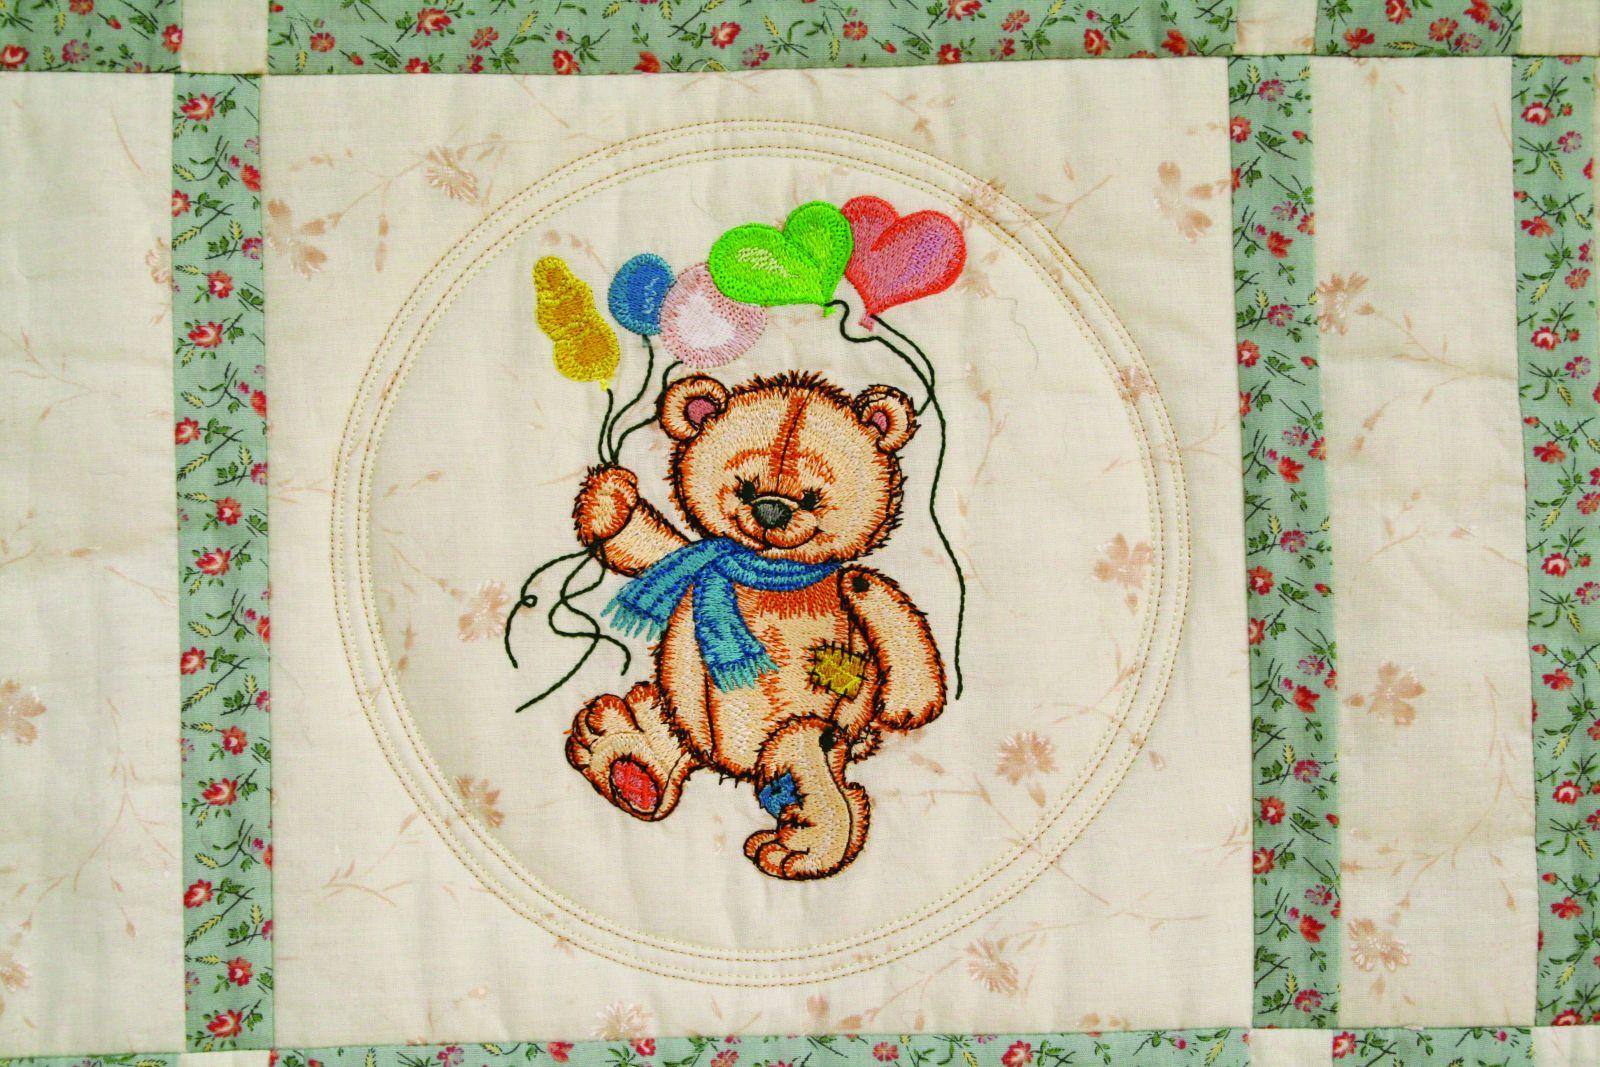 Old Toys art and embroidery